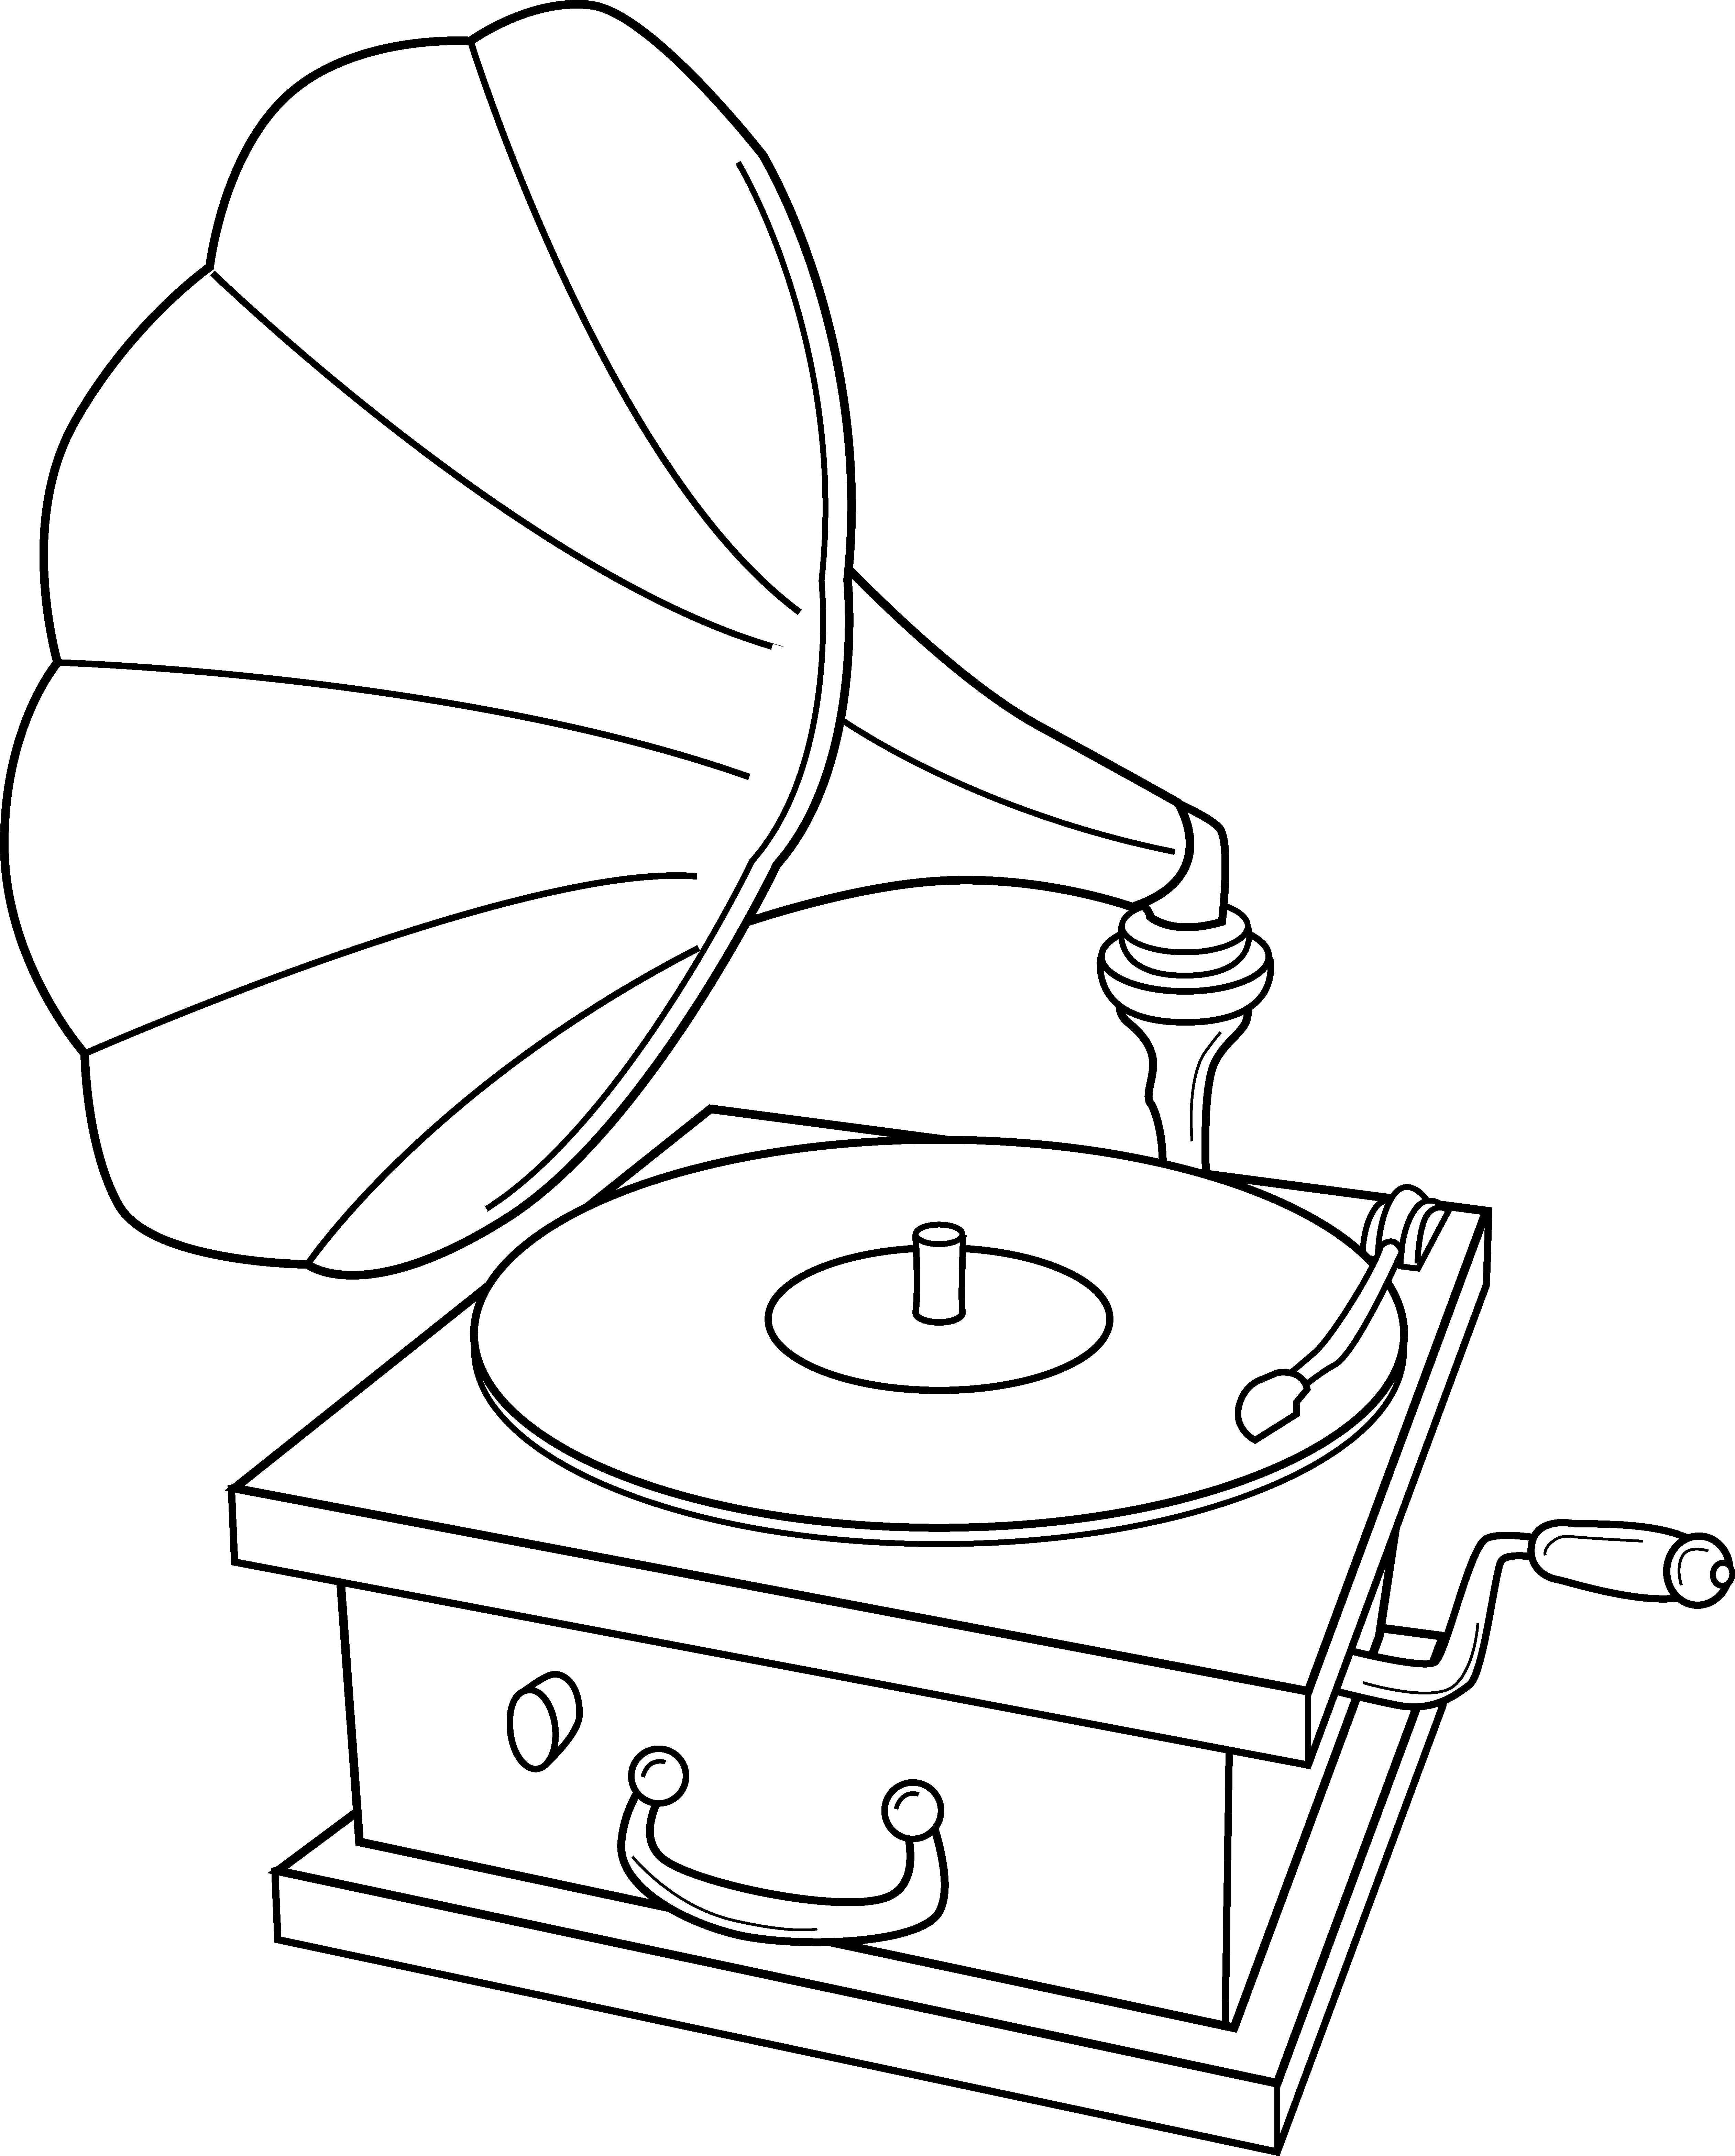 Retro clipart vintage. Old record player drawing